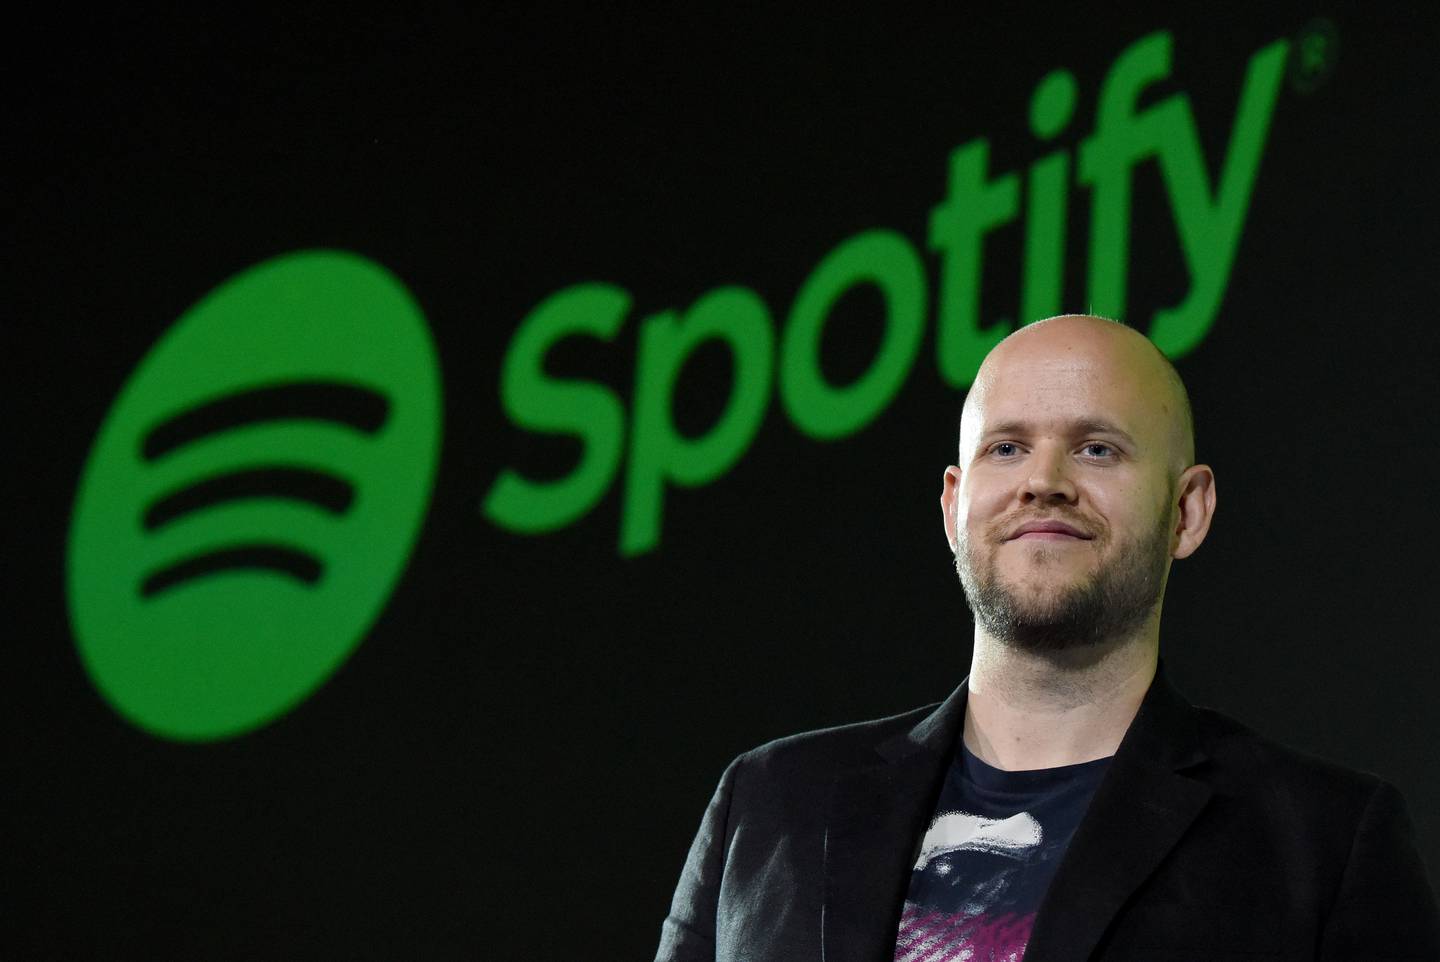 Daniel Ek, CEO of Swedish music streaming service Spotify, poses for photographers at a press conference in Tokyo on September 29, 2016. 
Spotify kicked off its services in Japan on Sept